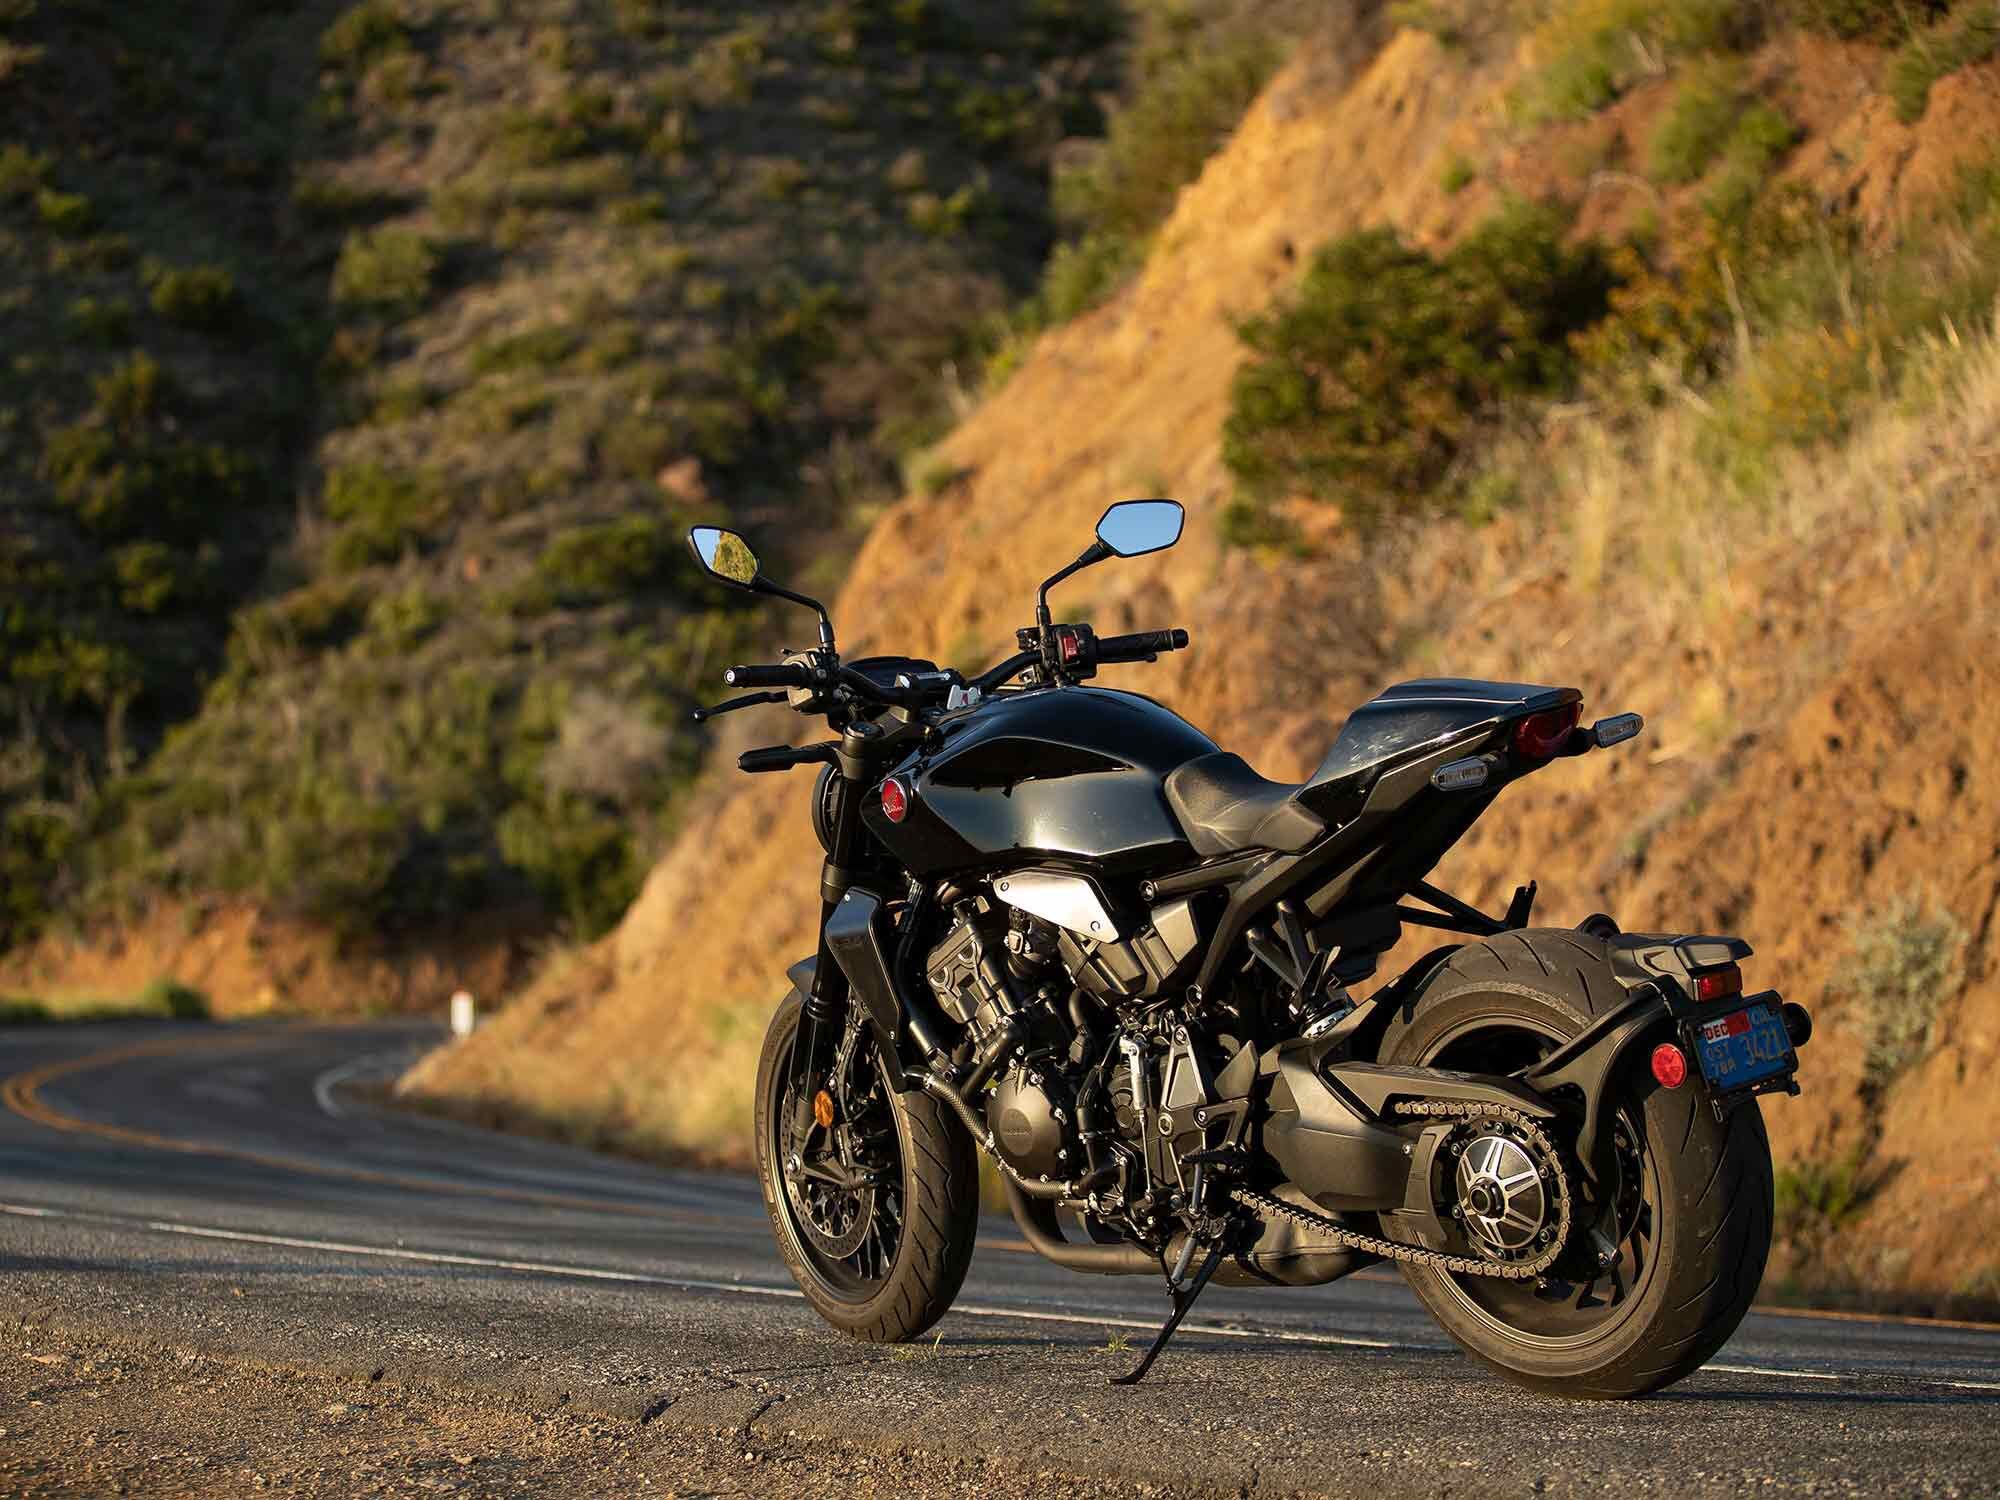 It’s hard to find many faults with the 2022 Honda CB1000R Black Edition.